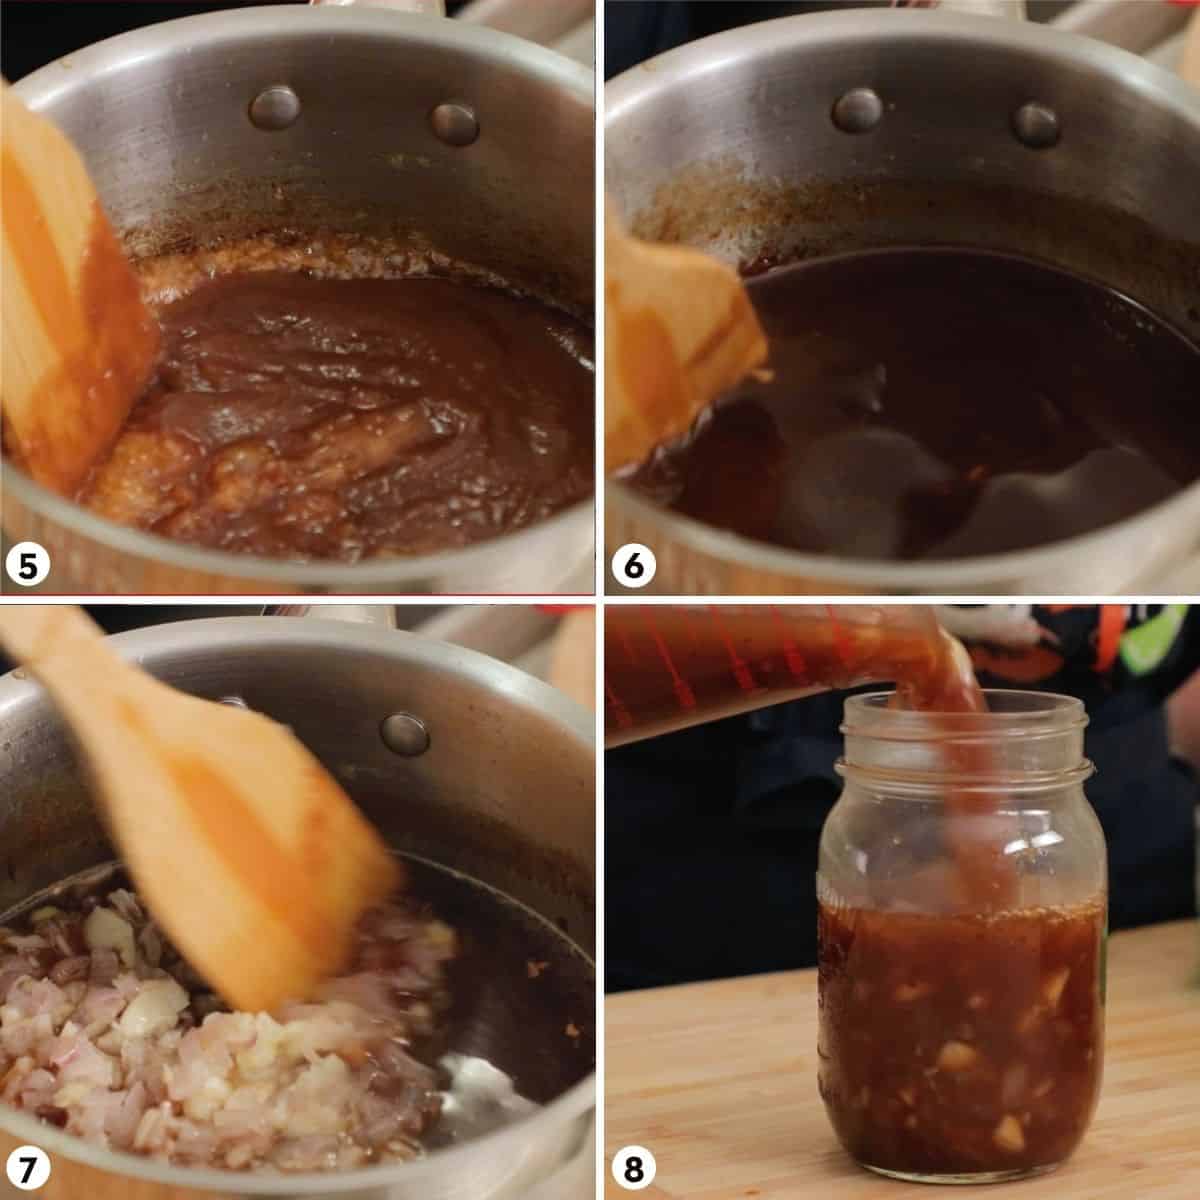 Process for making pad thai sauce steps 5-8